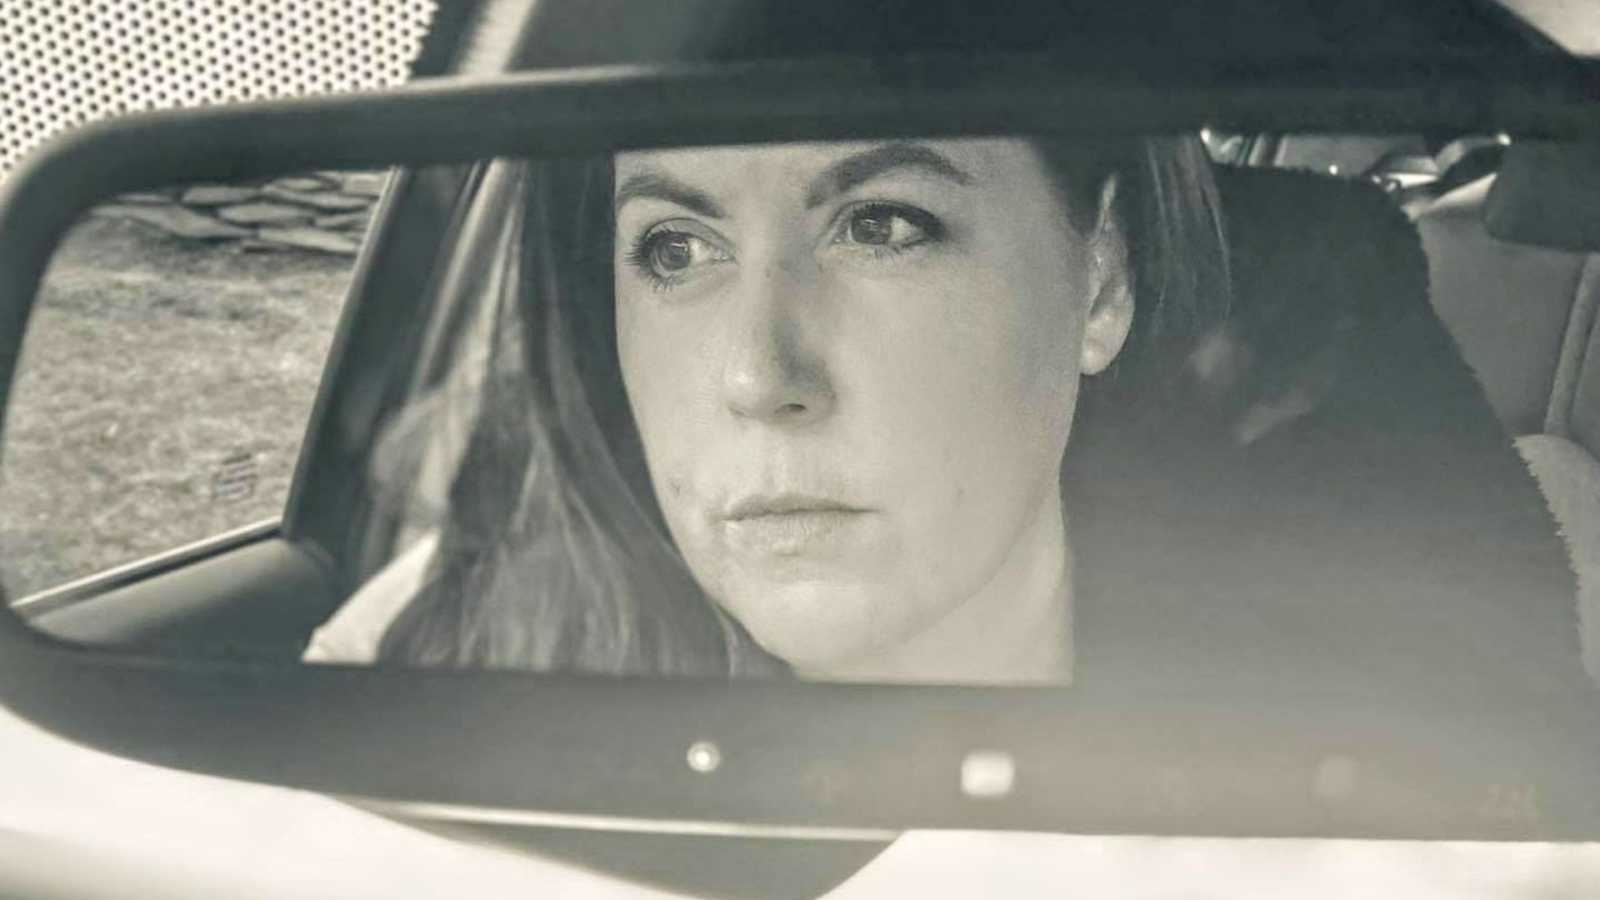 Woman takes a moody selfie in the rearview mirror of her car while reflecting on her inner self